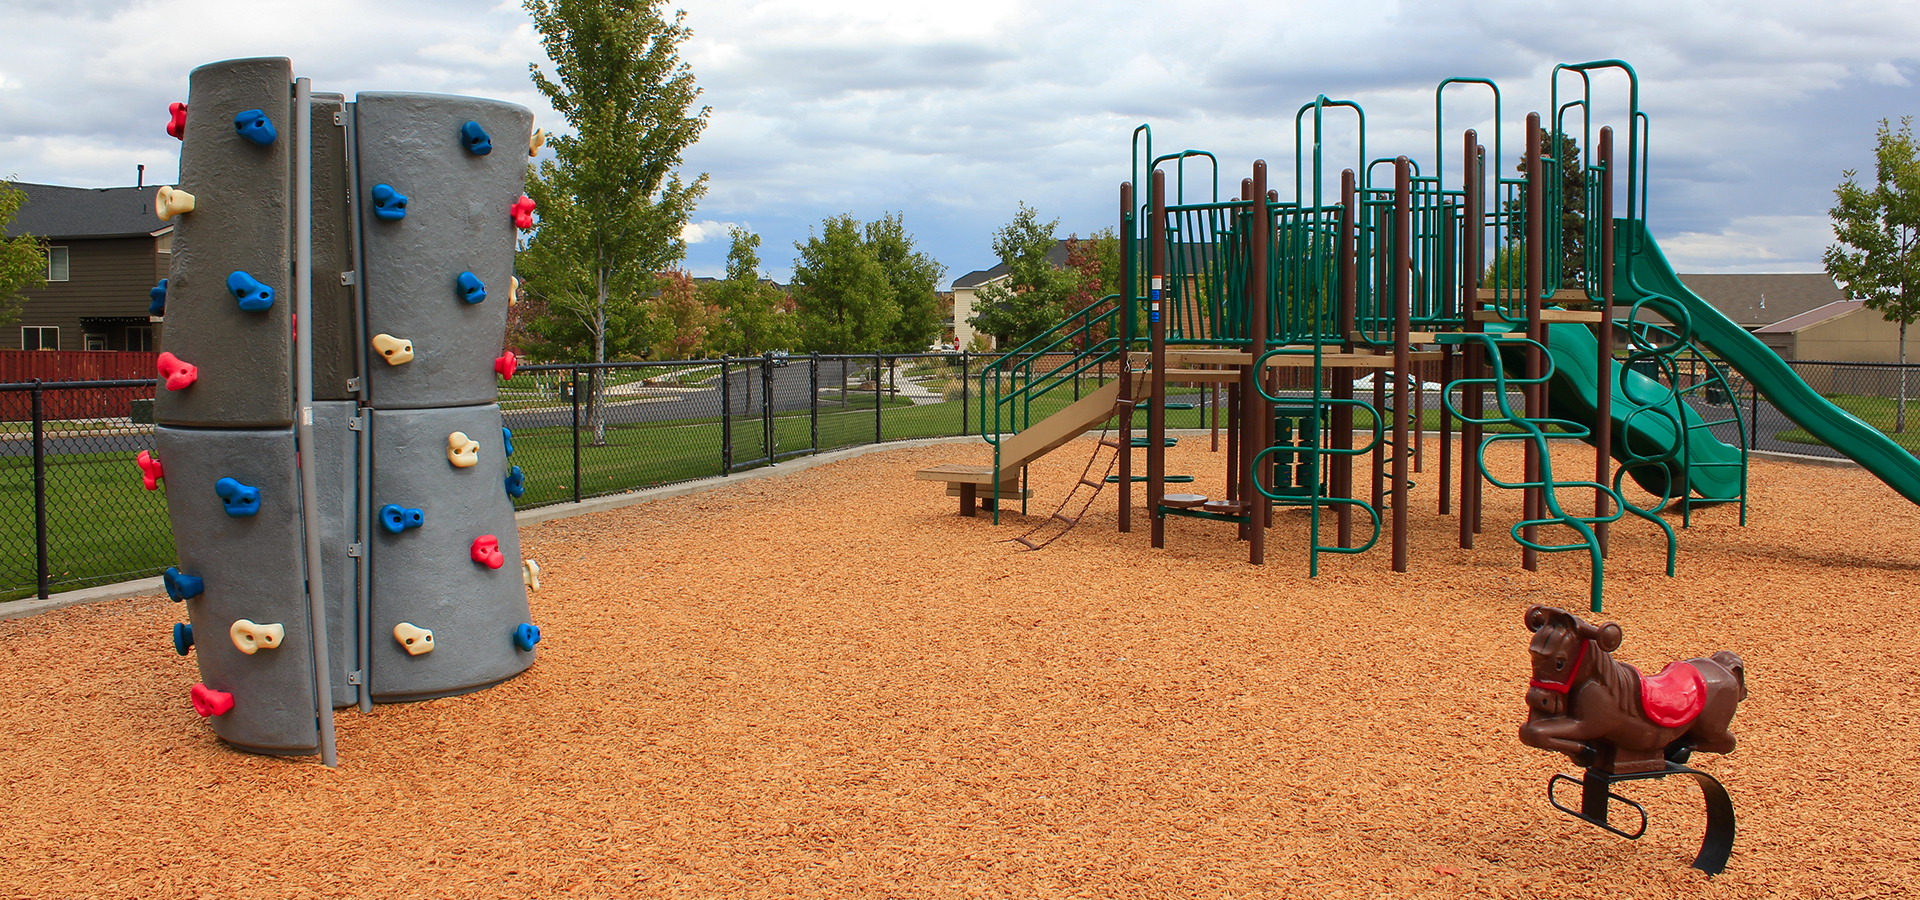 The playground at Sun Meadow Park.